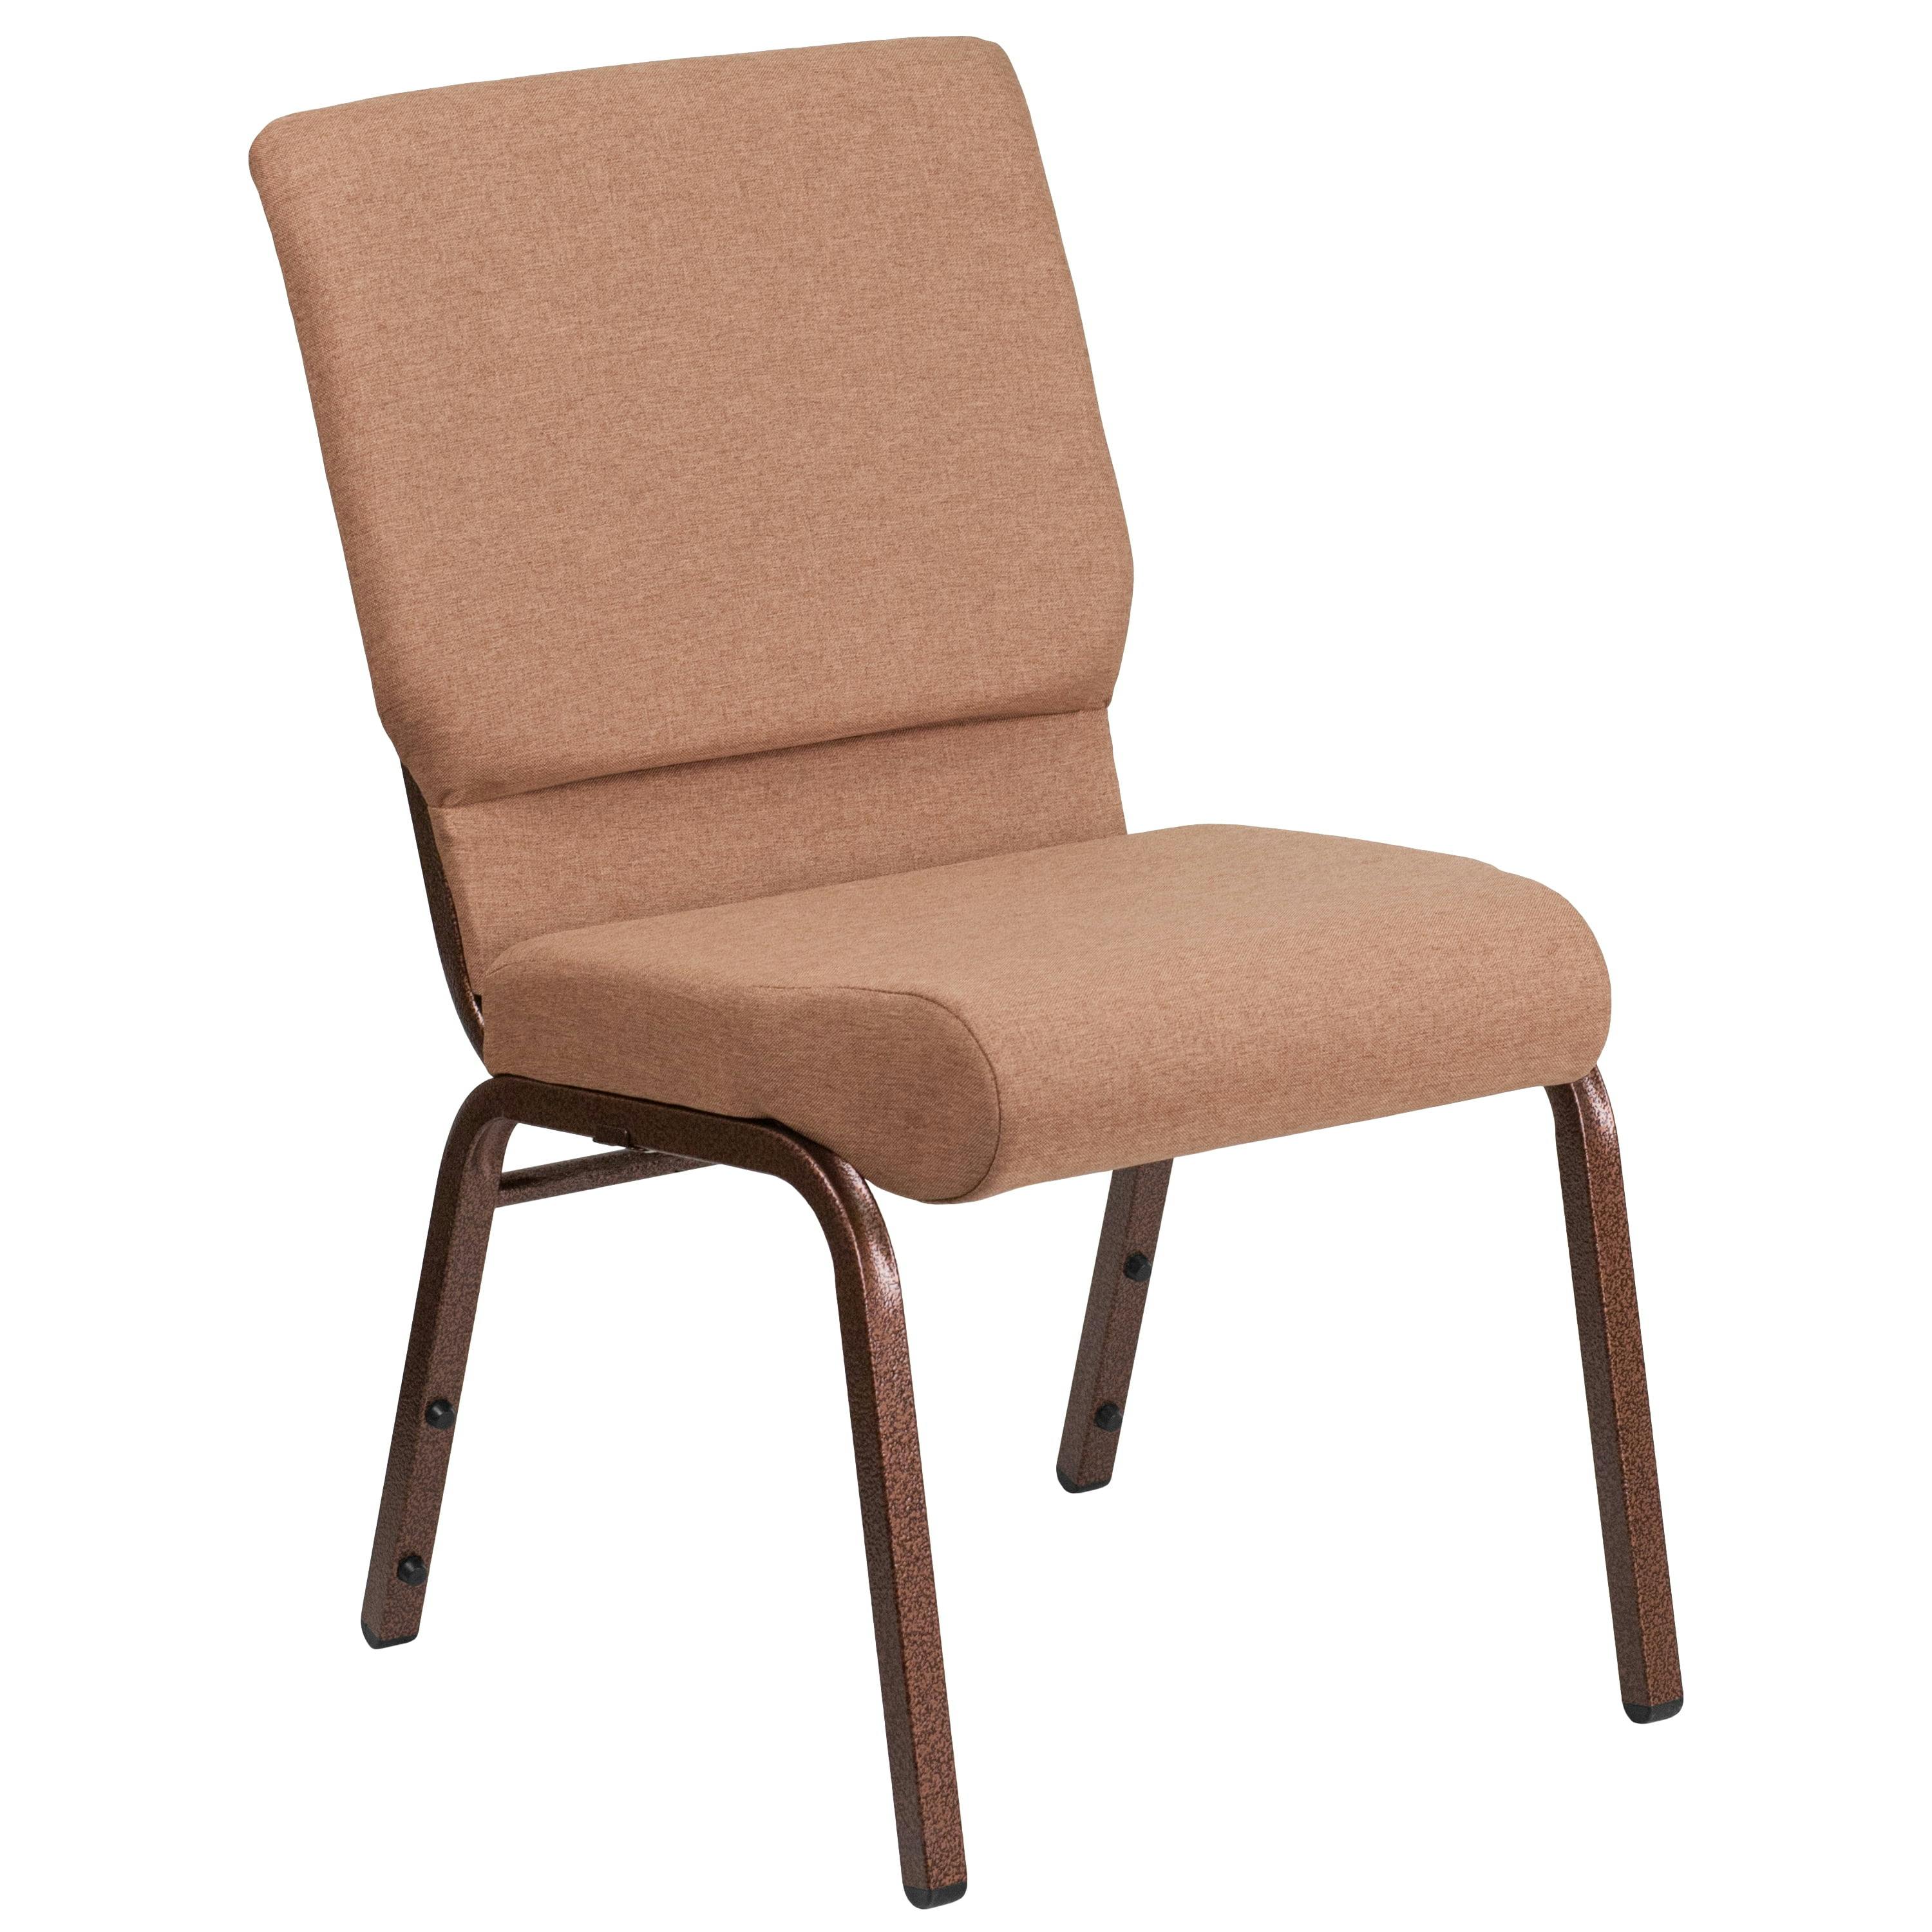 Caramel Fabric Stacking Chair with Copper Vein Metal Frame